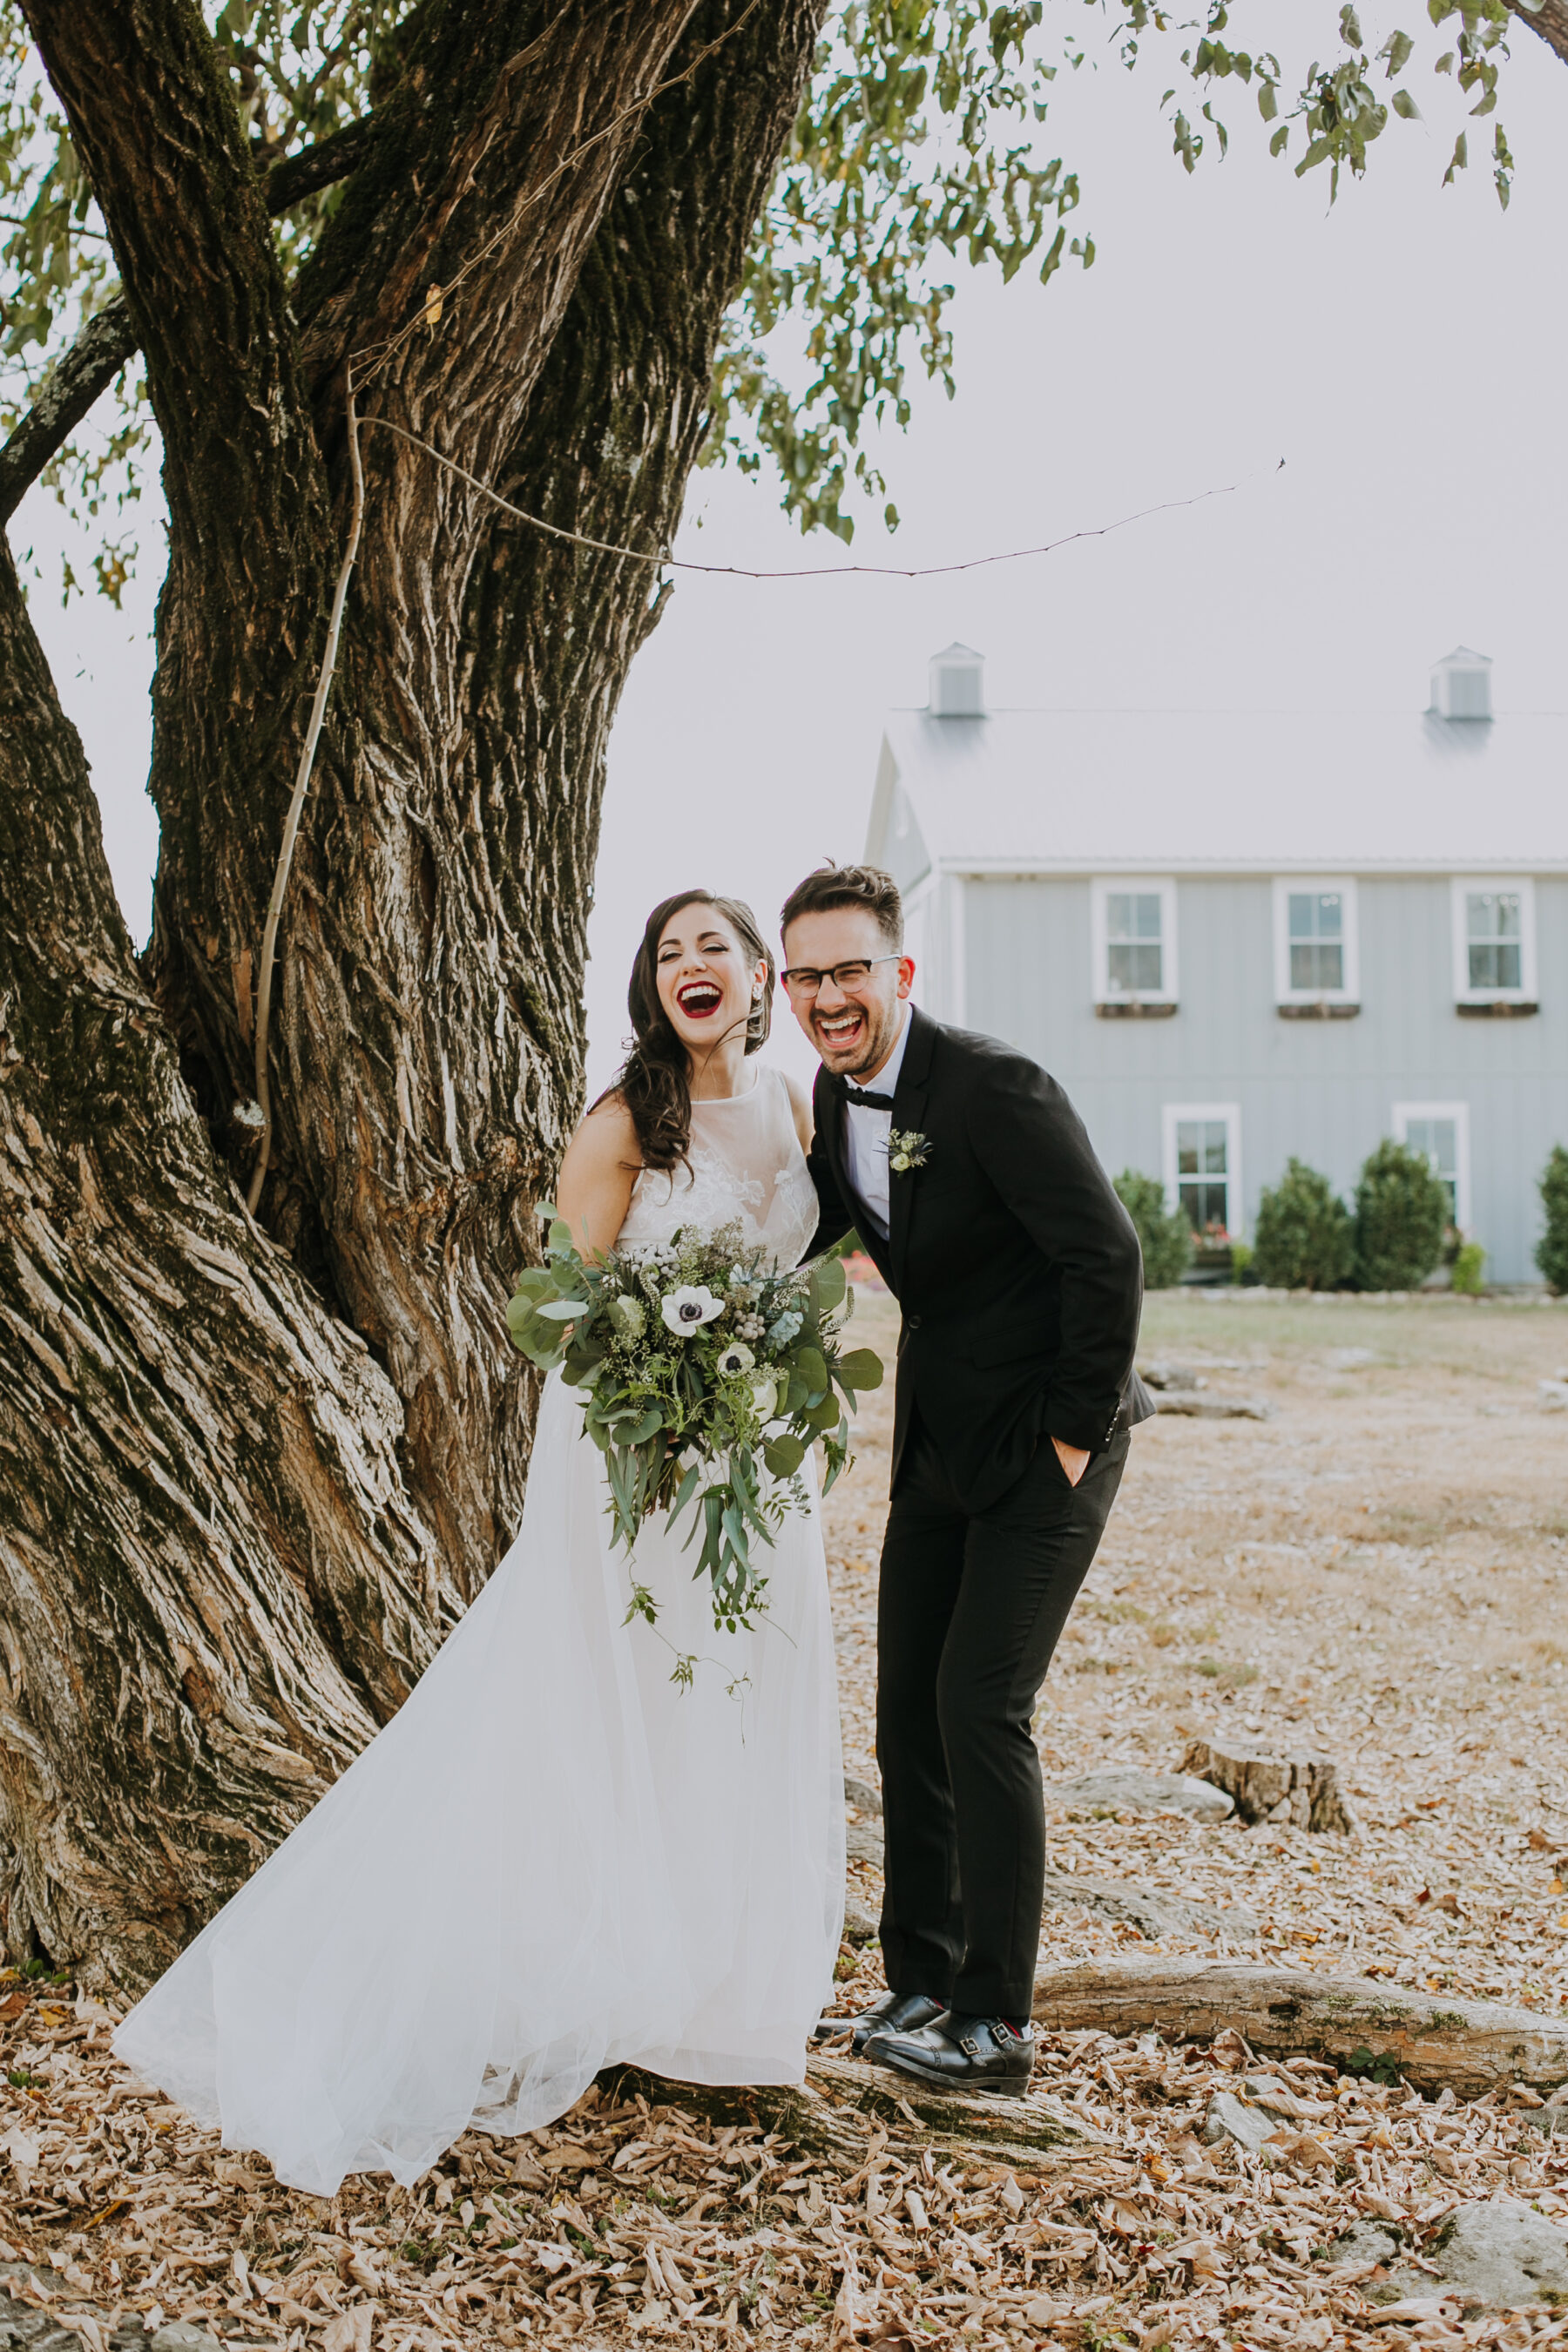 Wedding portrait: Nashville Wedding with Beautiful Views by Teale Photography featured on Nashville Bride Guide